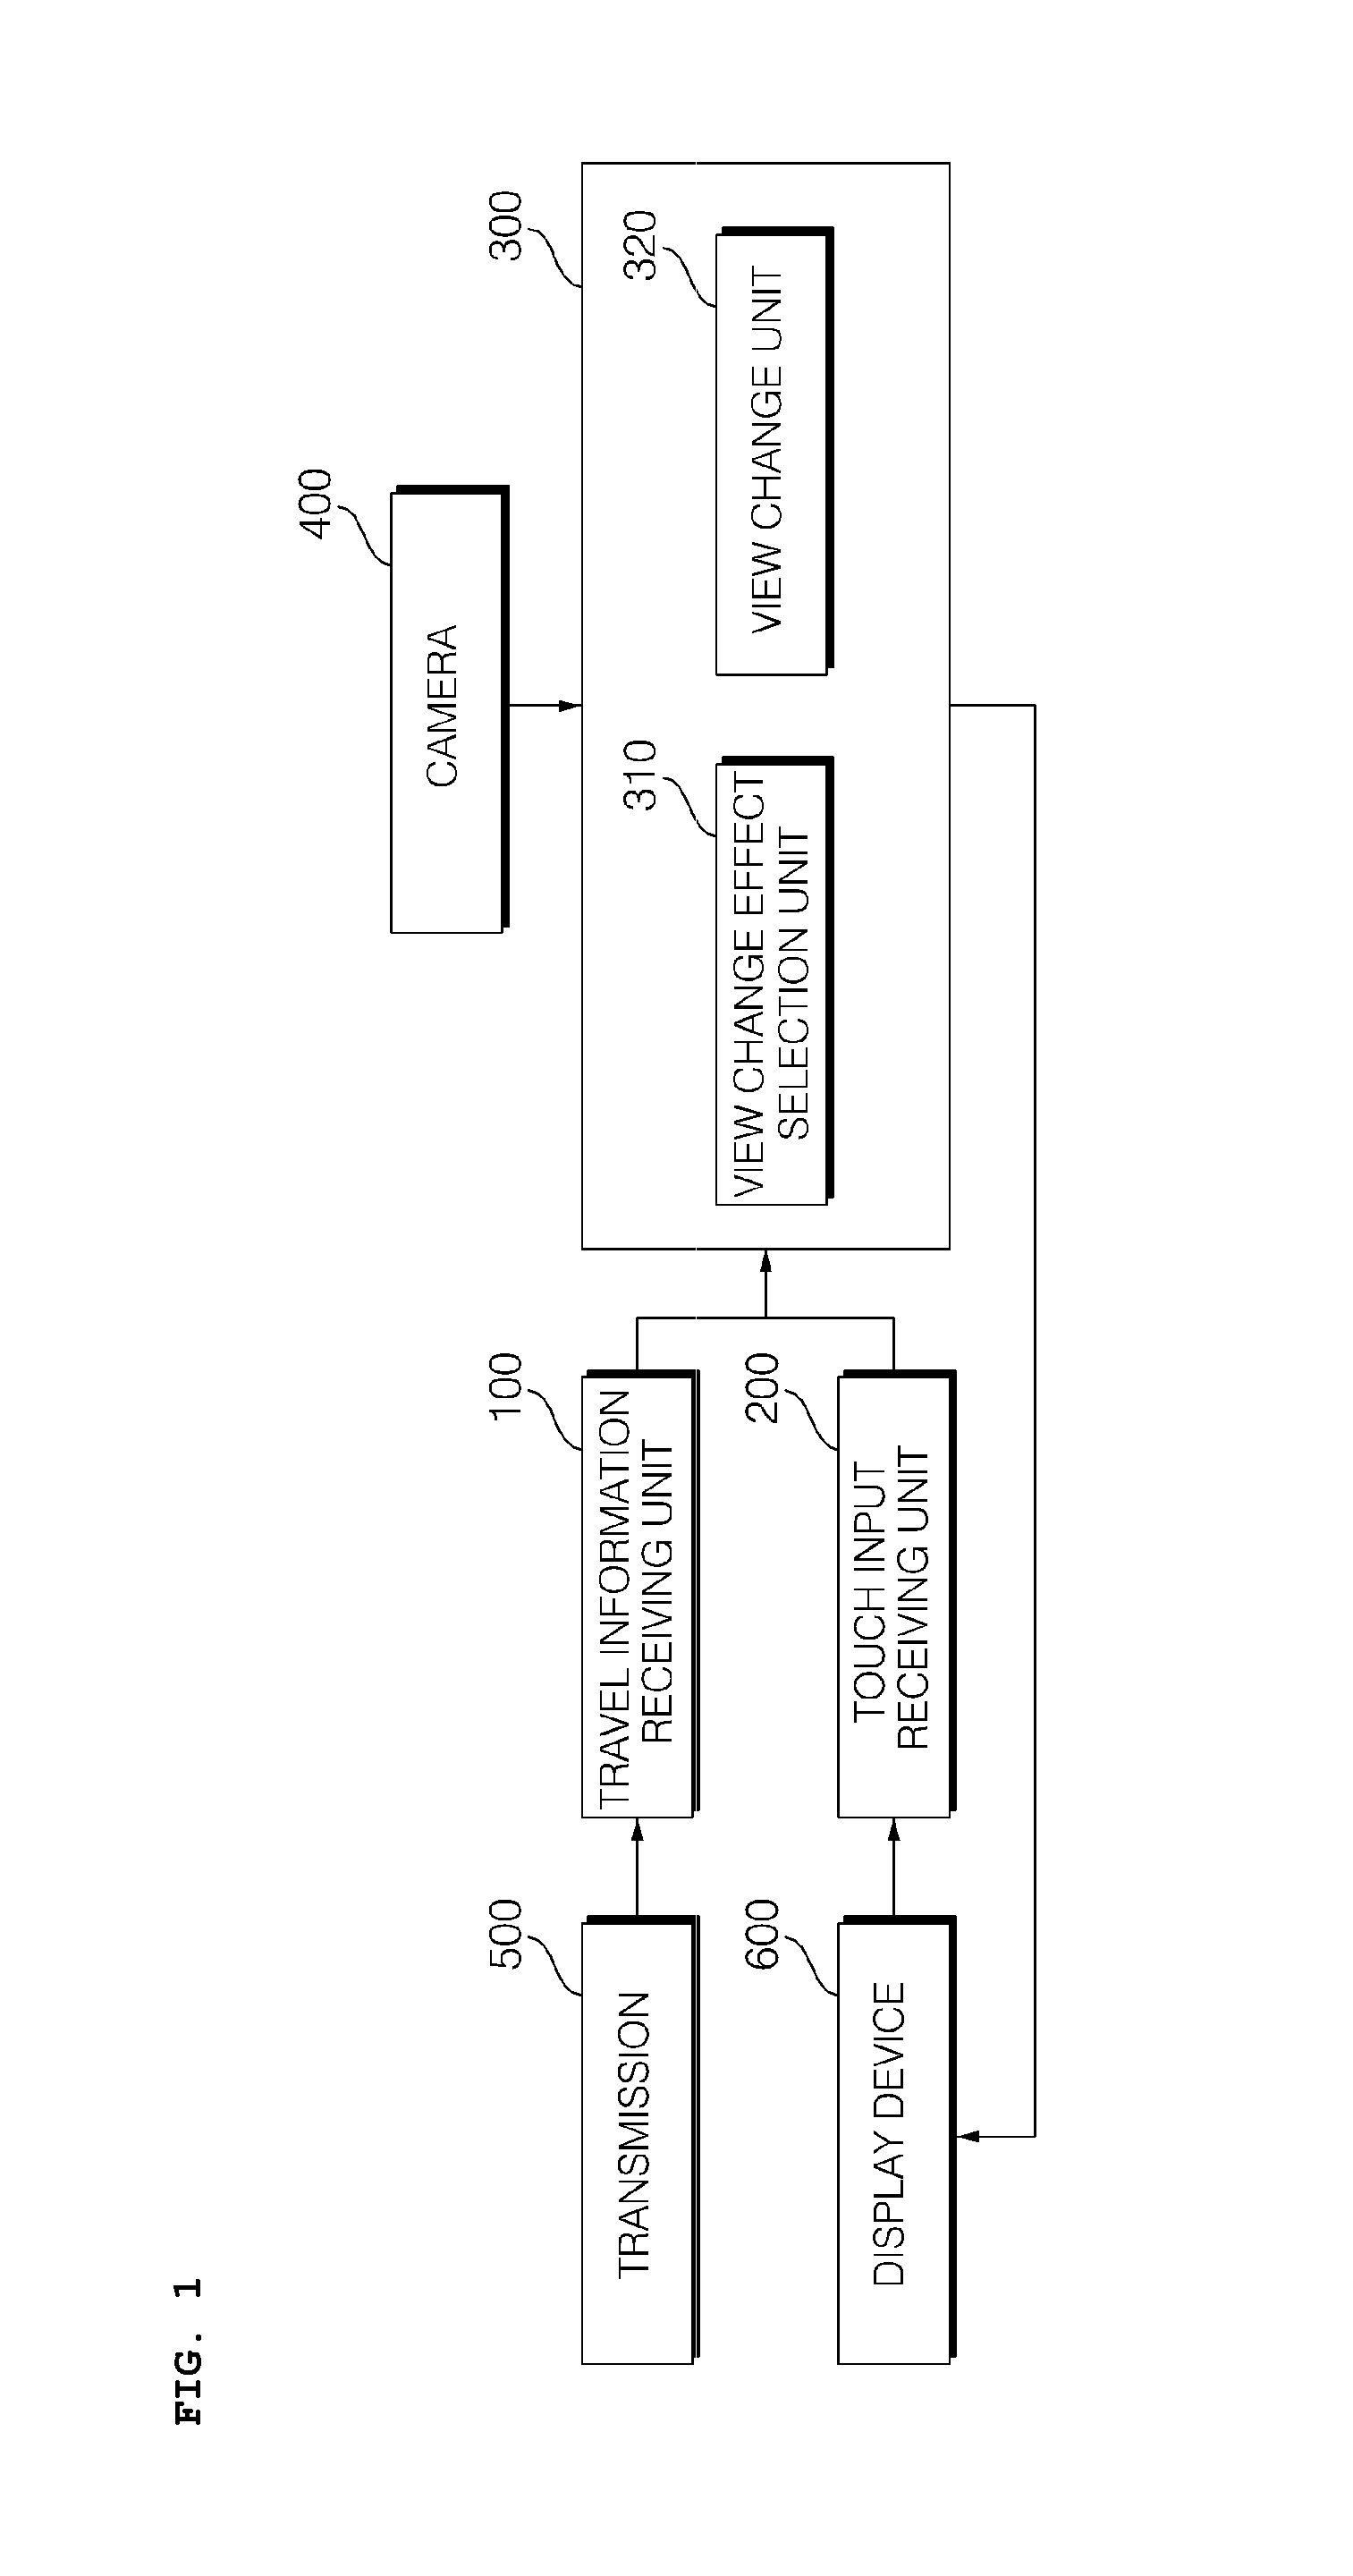 Around view monitor system and method of controlling the same